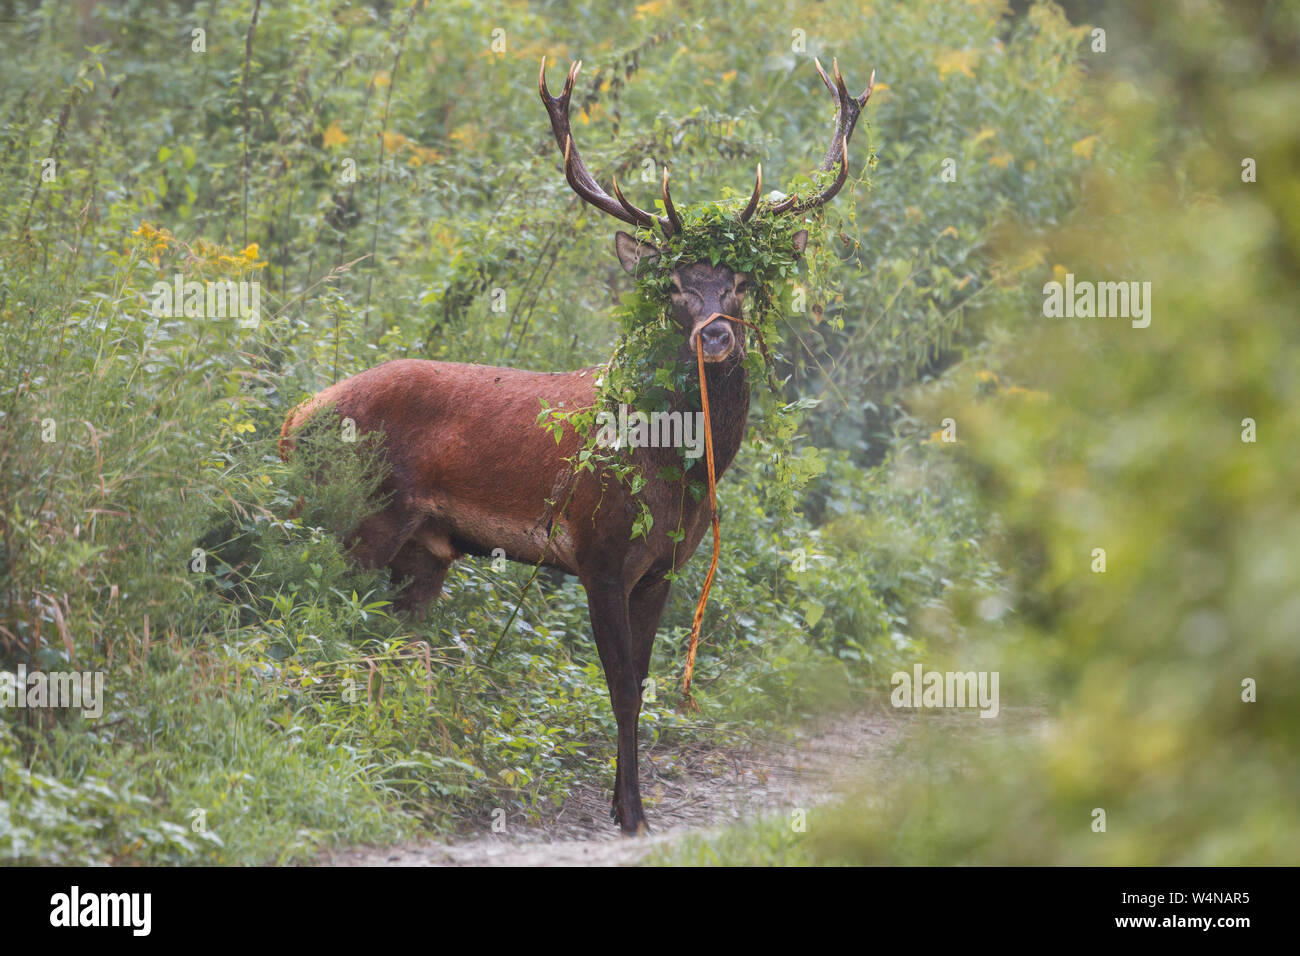 Red deer outgoing from spinney overgrown of leaves in the summer with copyspace. Stock Photo